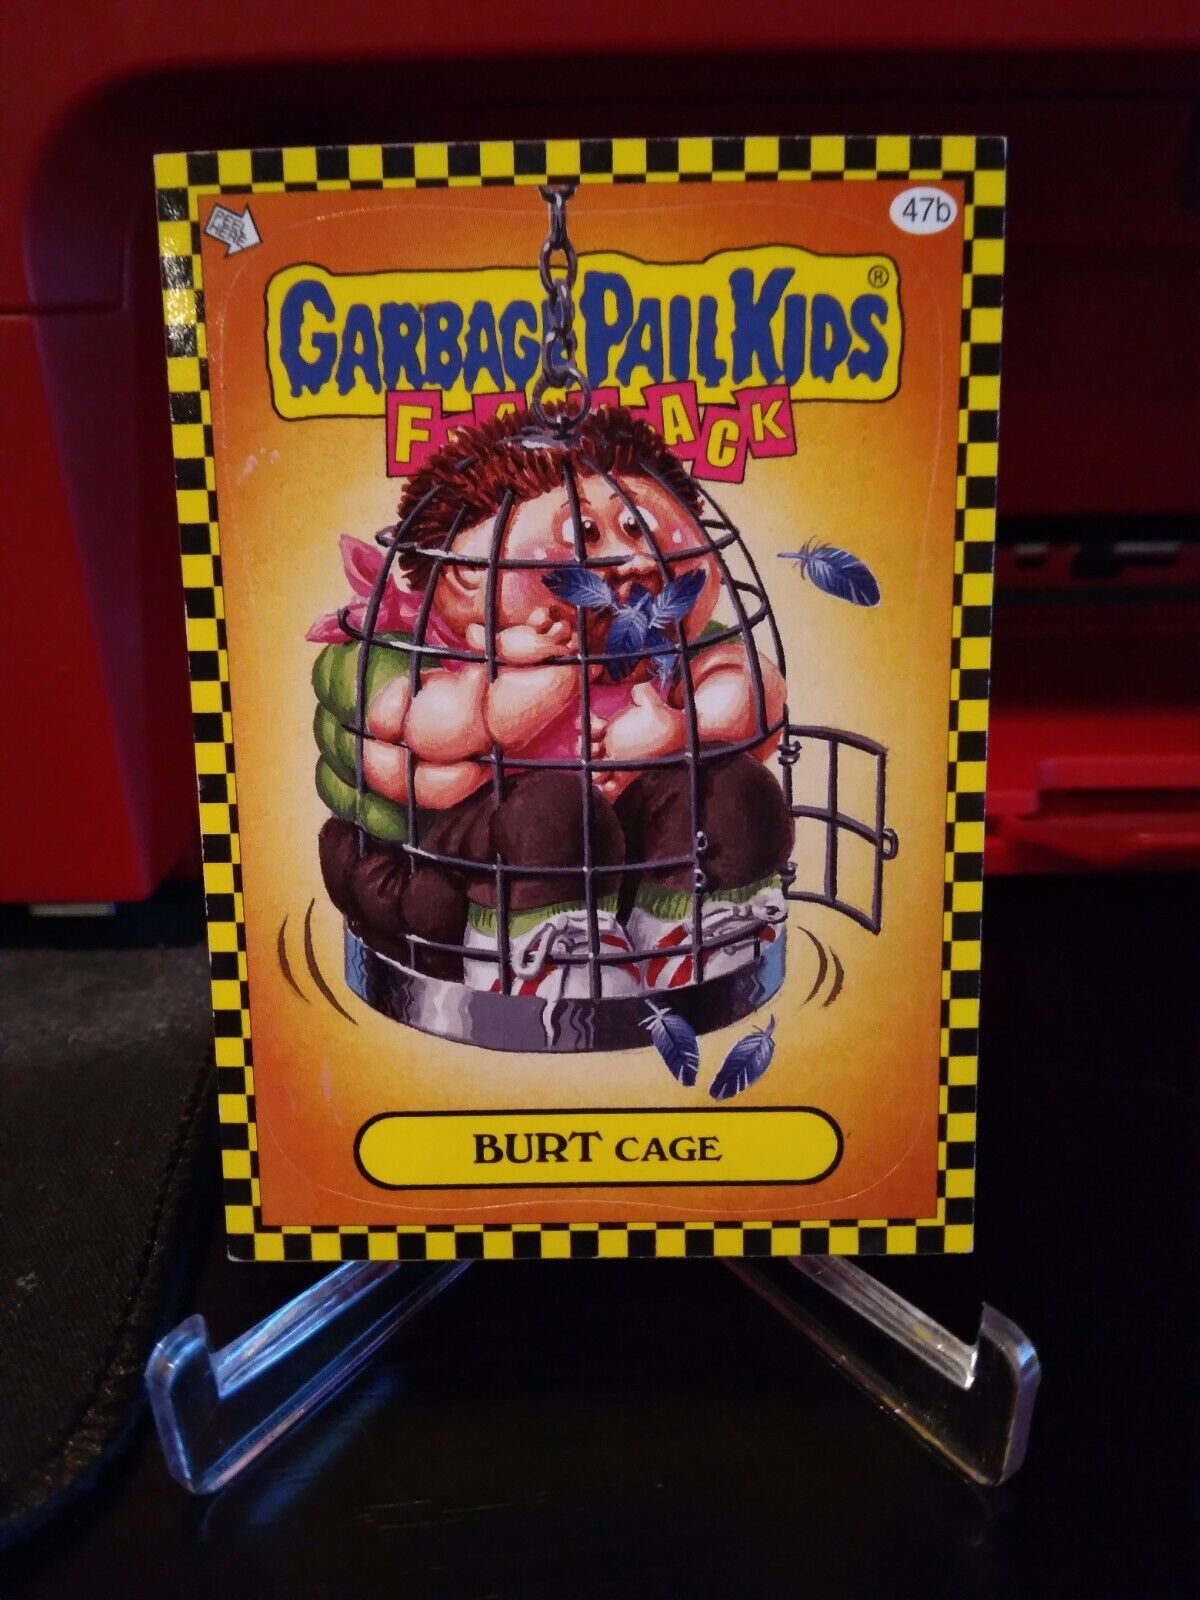 2010 Topps Garbage Pail Kids Flashback Card #47b Burt Cage PLEASE REHOME ME WOW